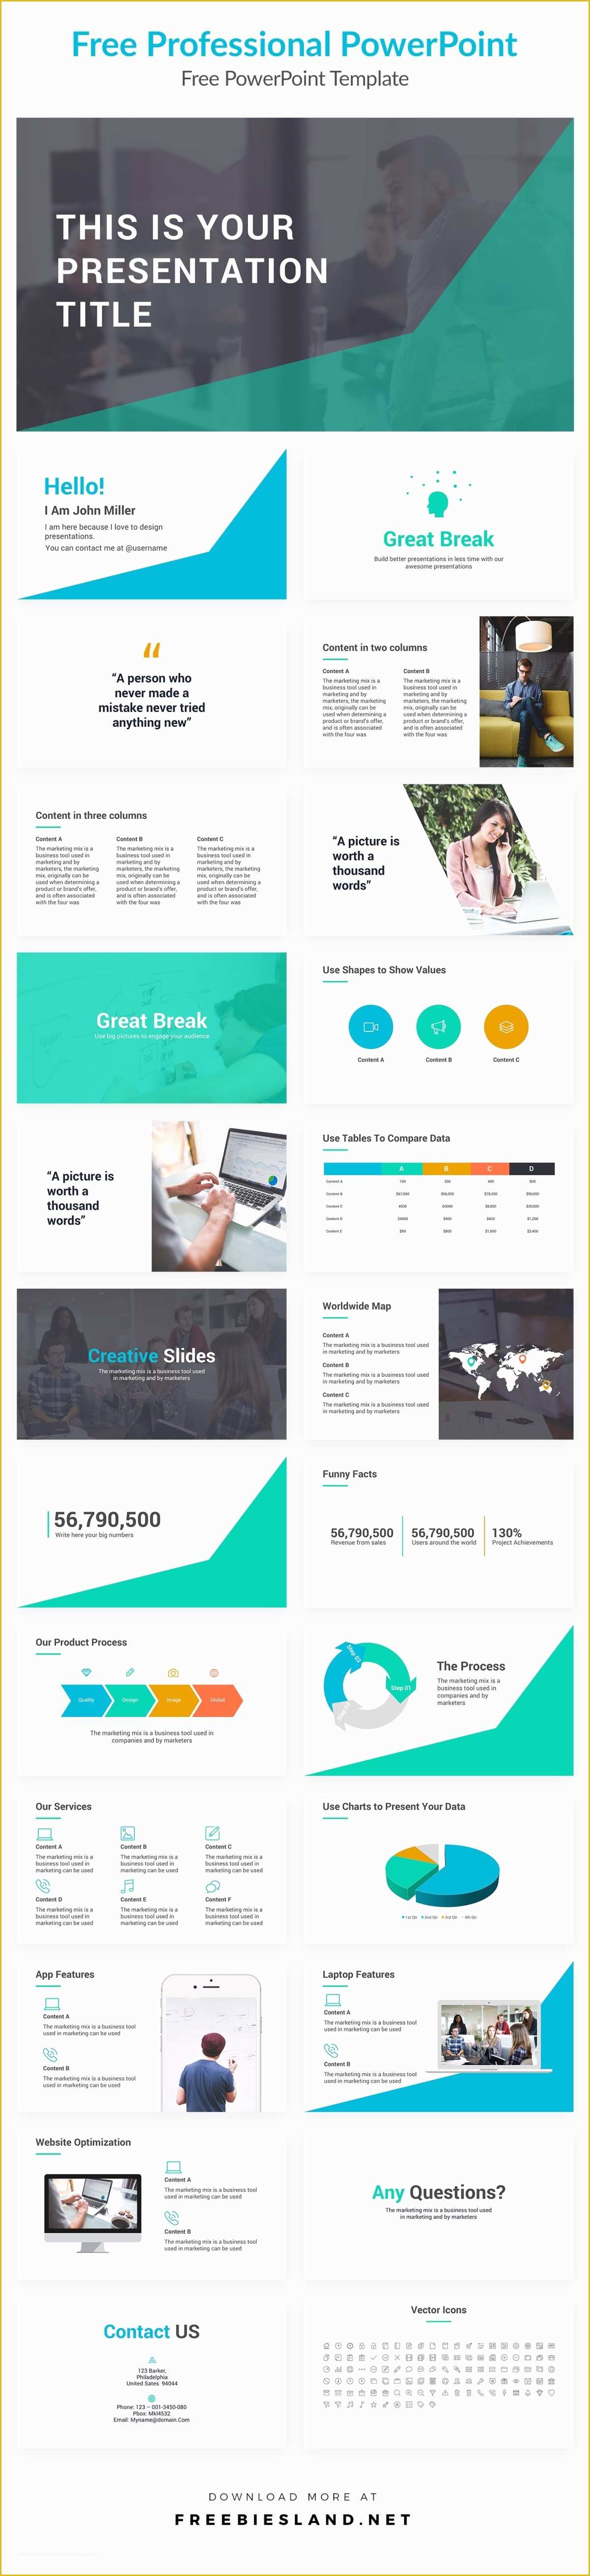 Free Professional Powerpoint Templates 2017 Of Free Professional Powerpoint Presentation Template Pptx Ppt